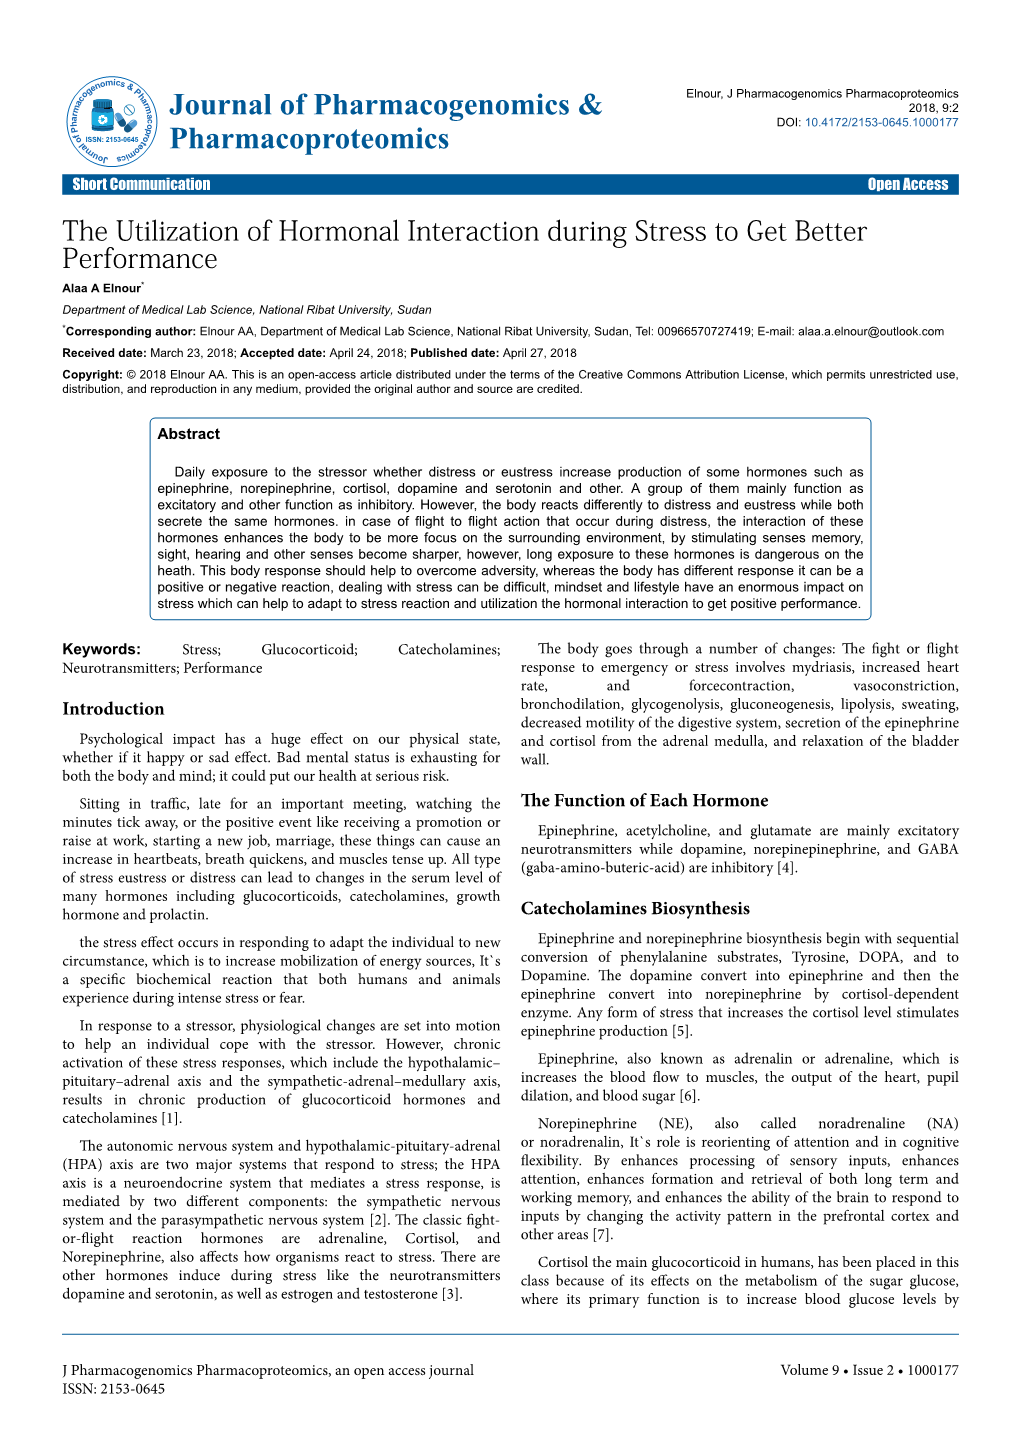 The Utilization of Hormonal Interaction During Stress to Get Better Performance